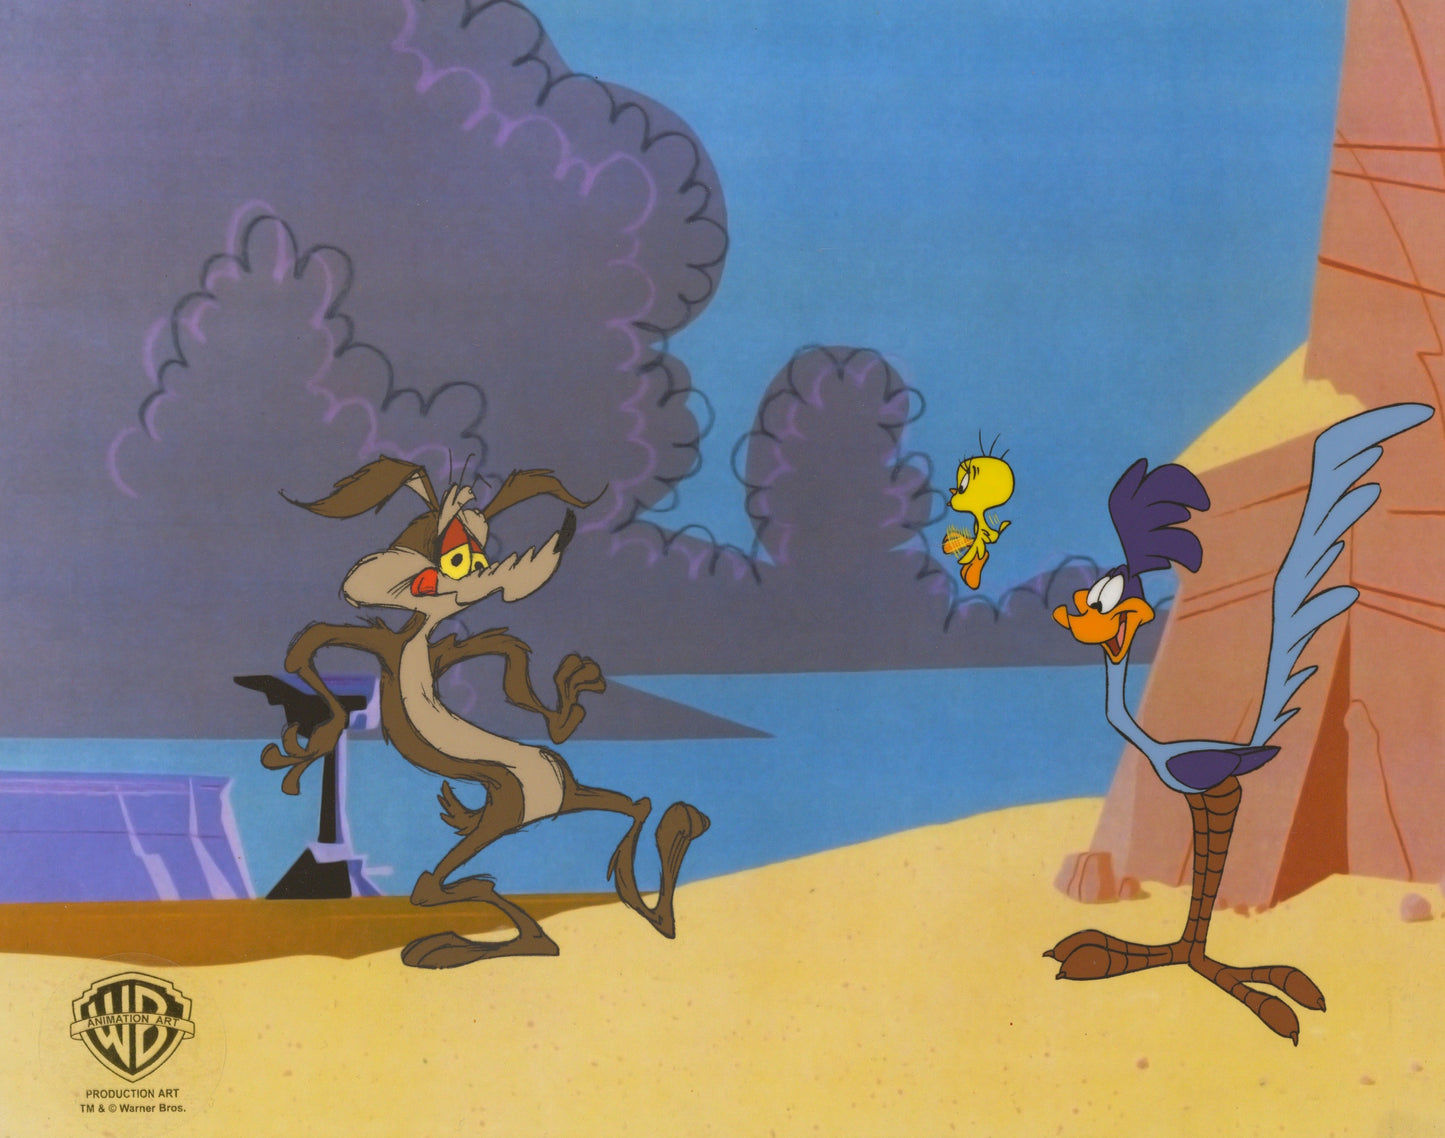 Looney Tunes Original Production Cel: Wile E. Coyote, Roadrunner, and Tweety